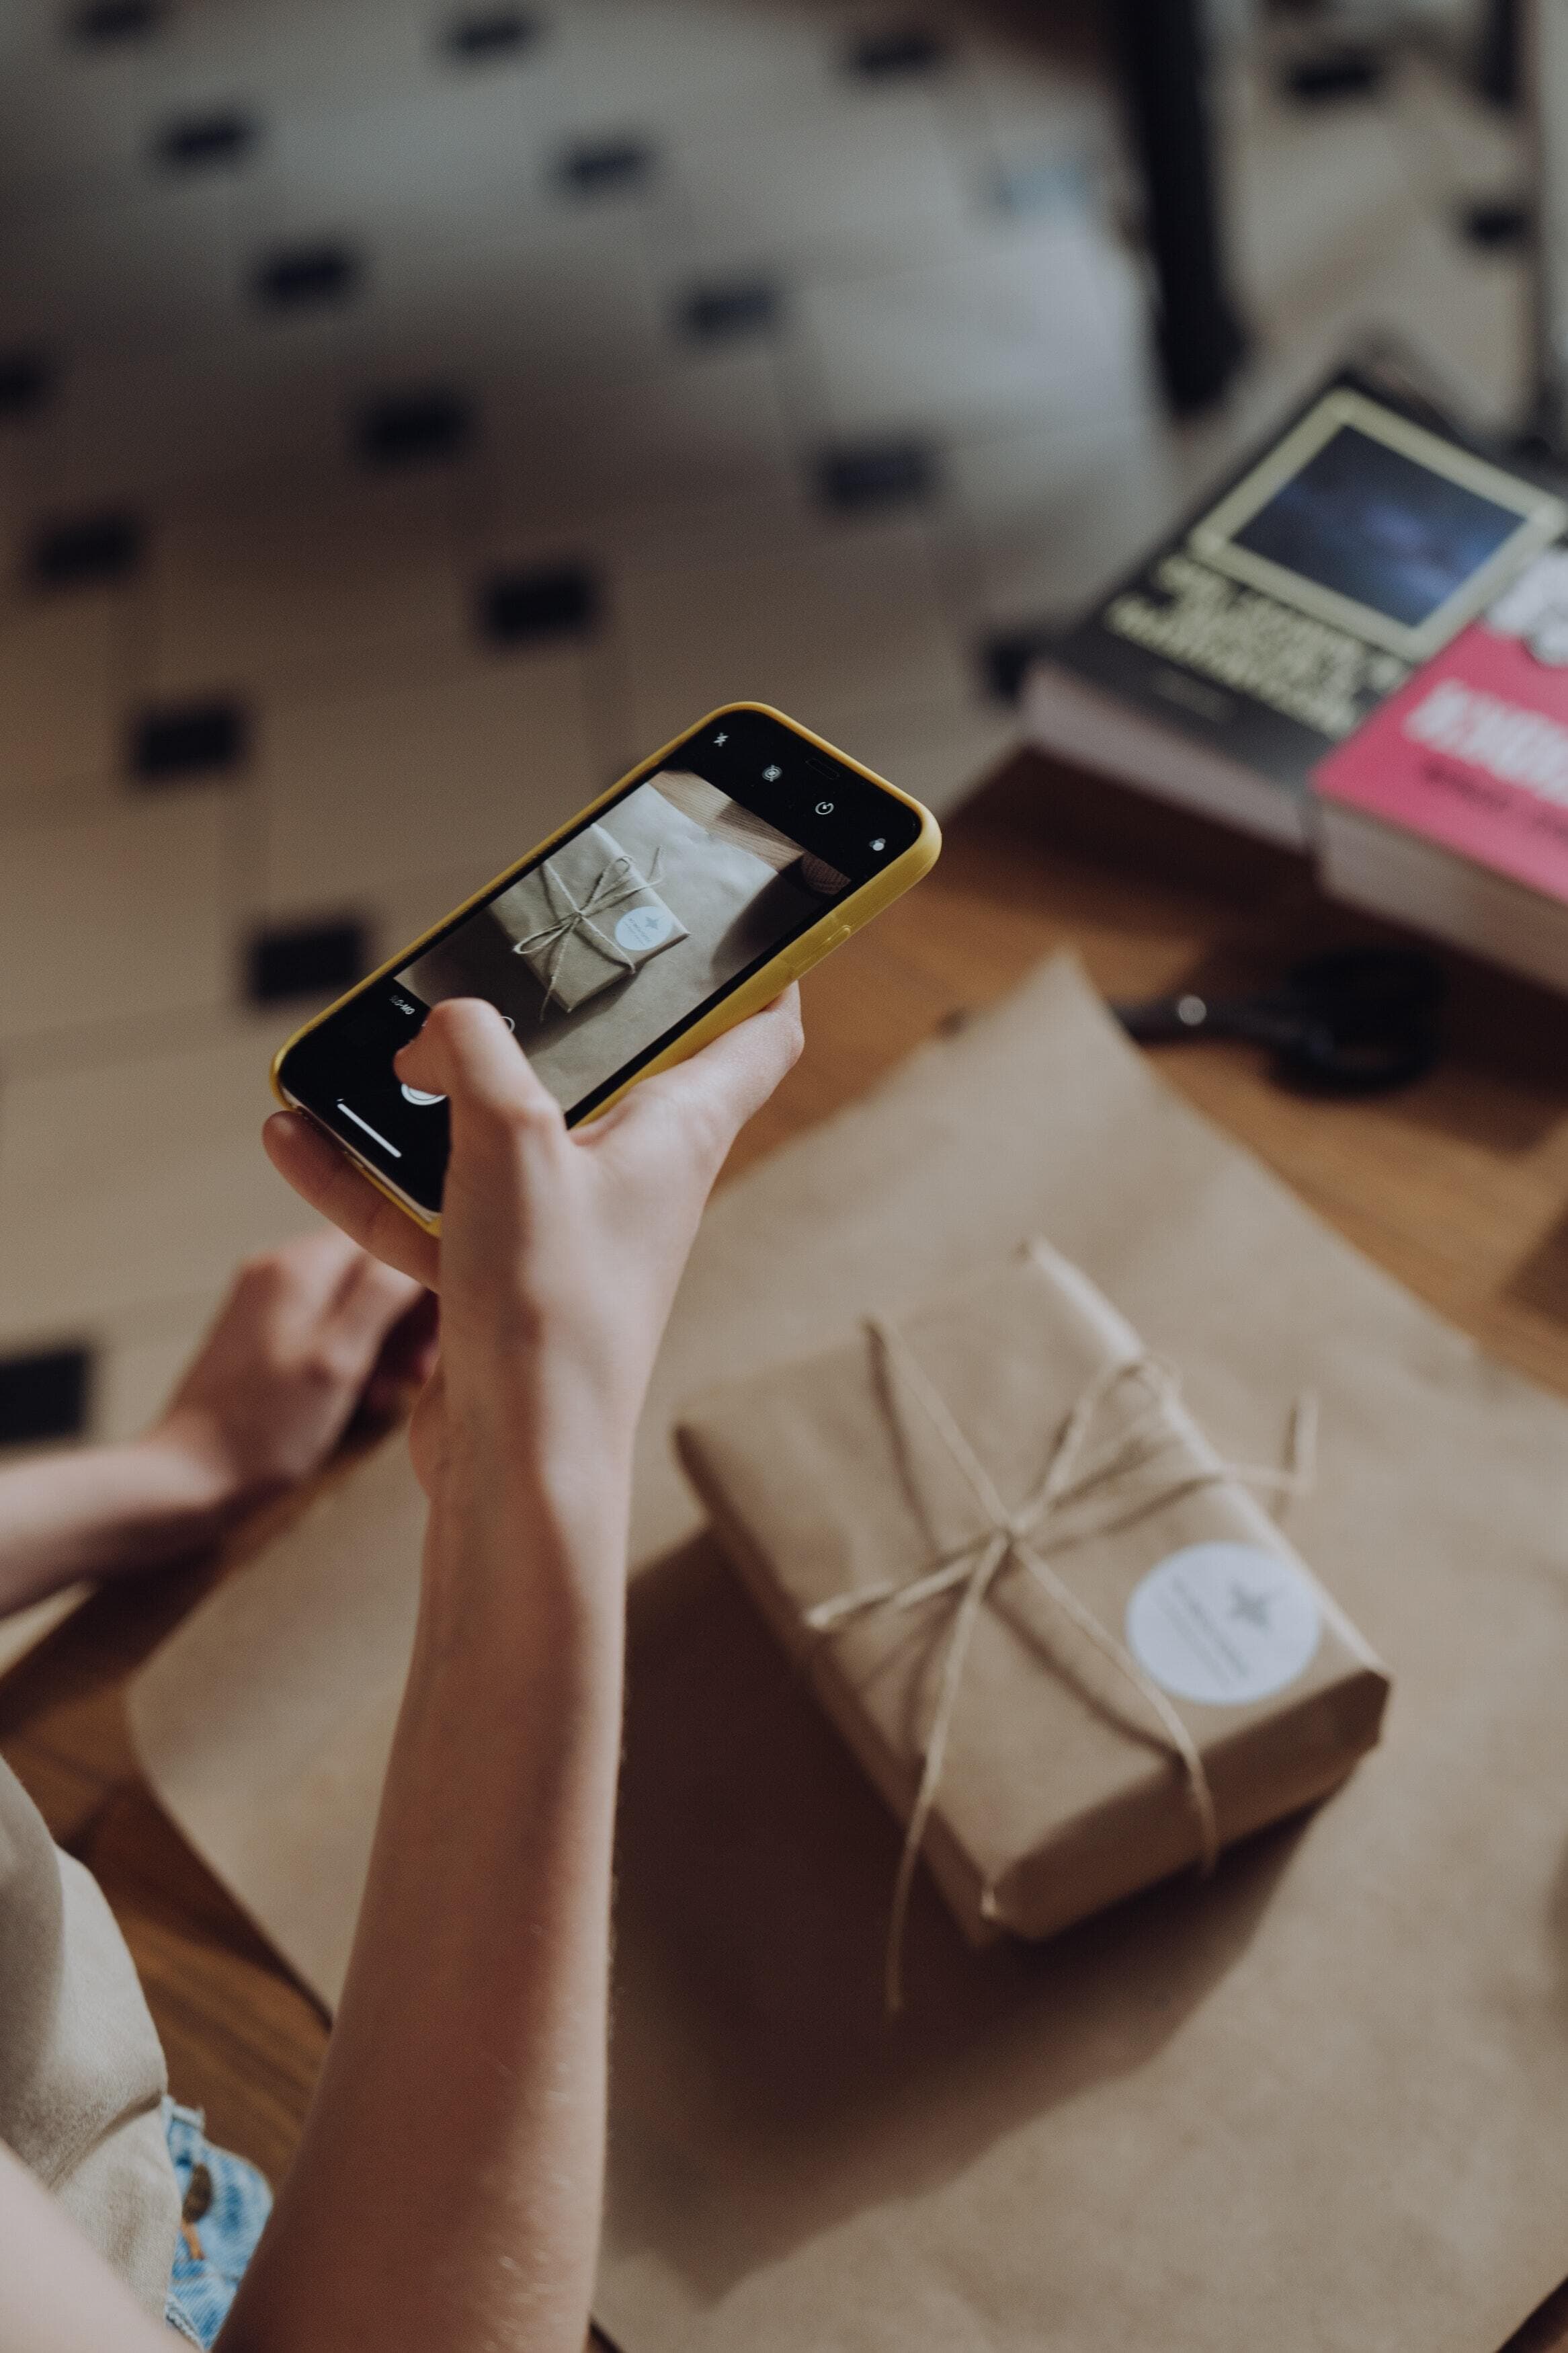 Someone is taking a picture of a gift wrapped in brown paper with a brown bow and a white, circular sticker on the top right corner of the package.